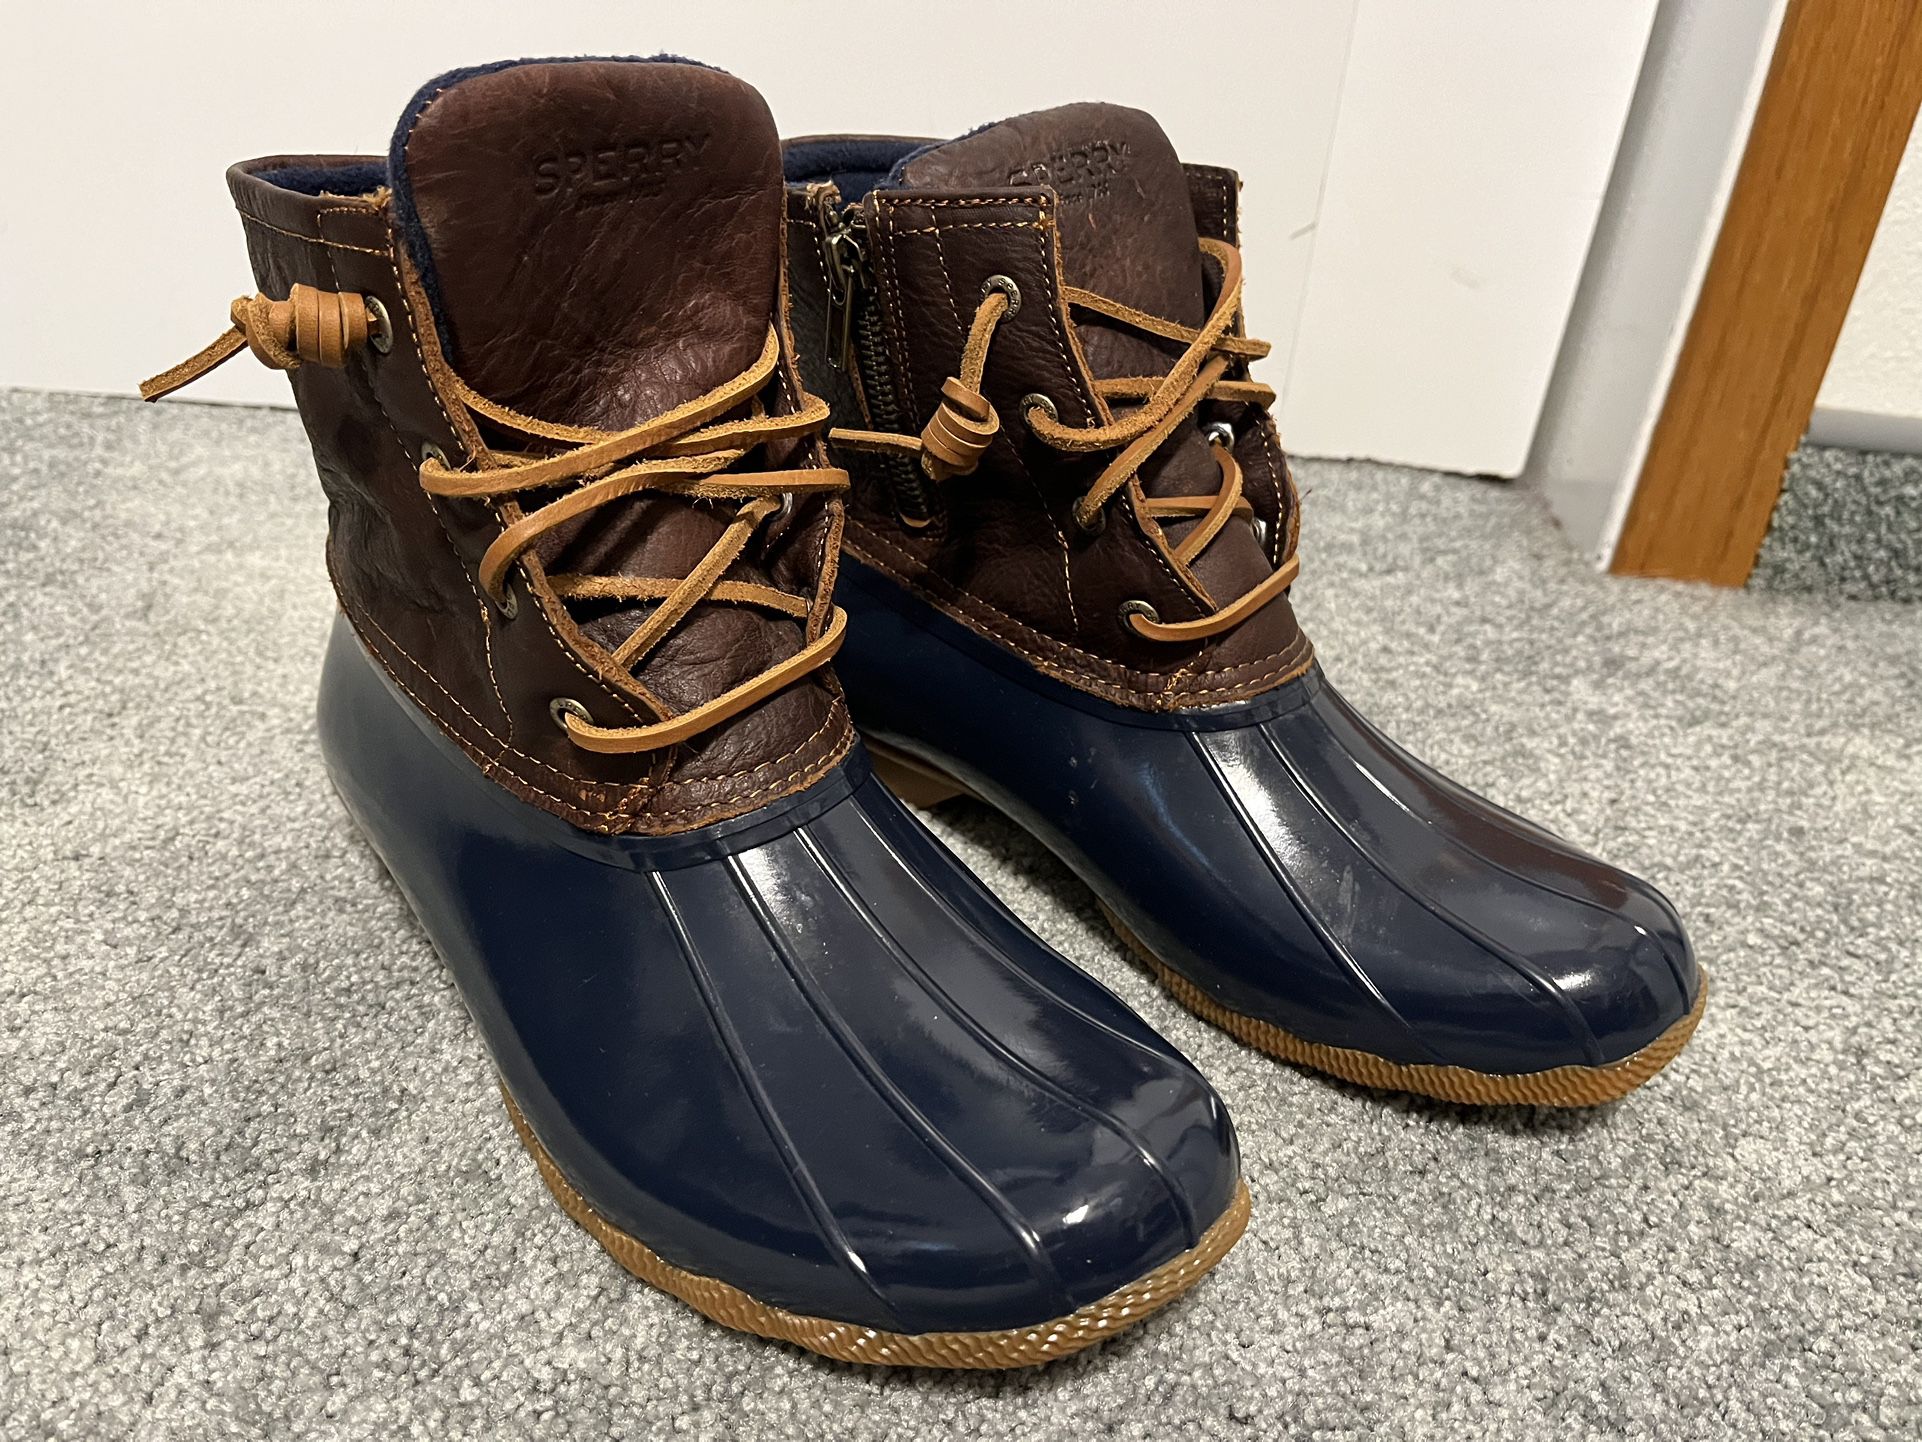 Sperry Duck Boots-size 9